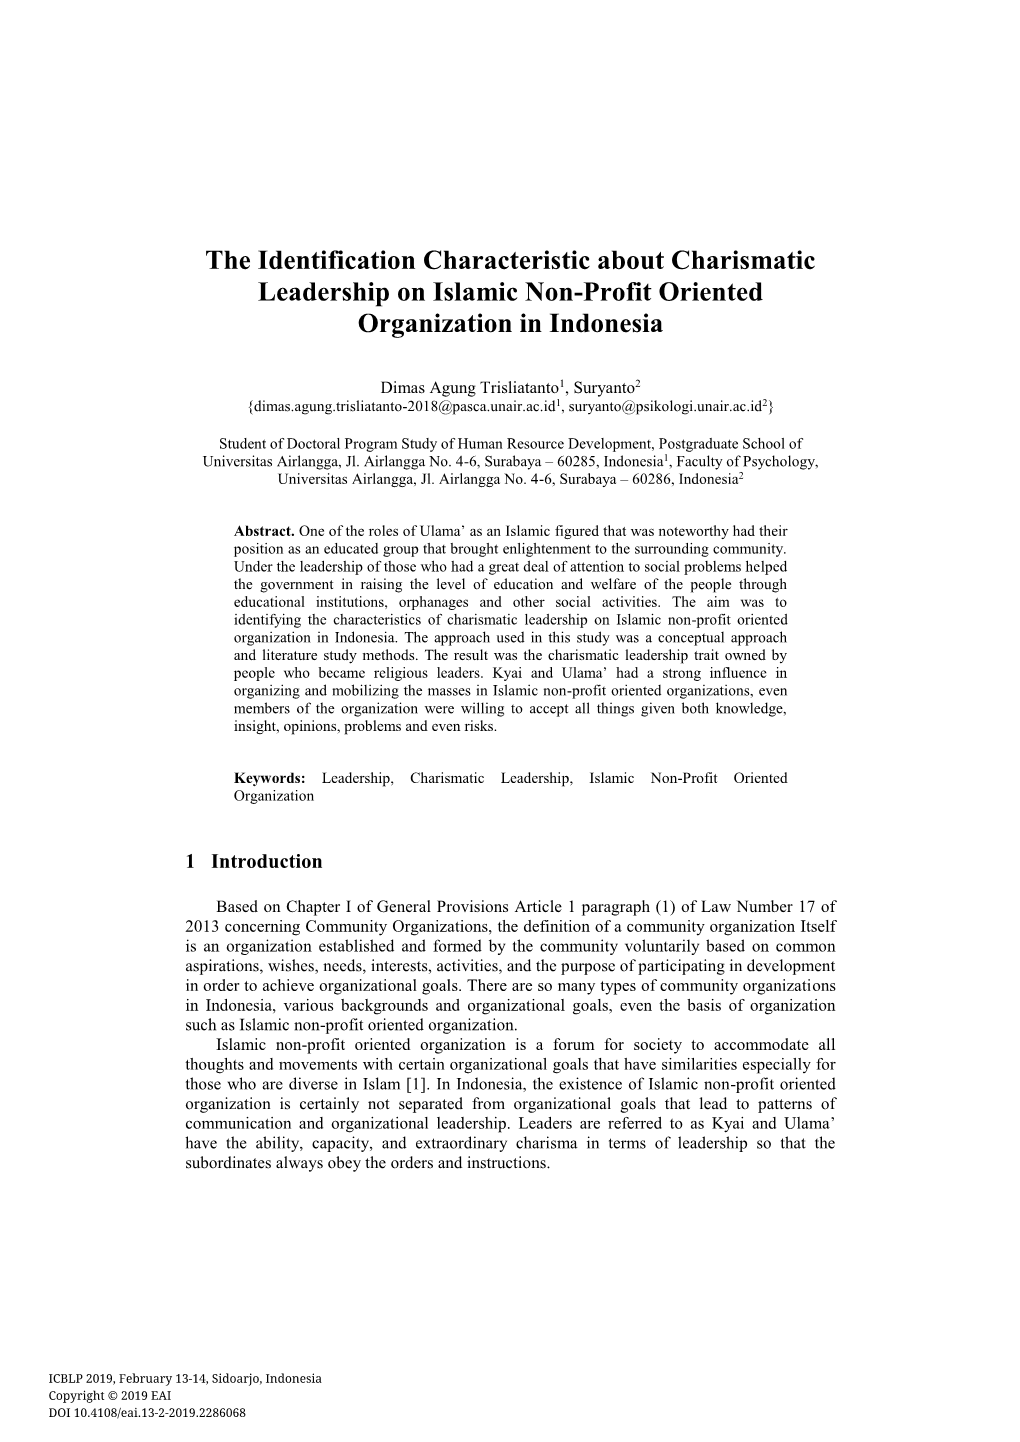 The Identification Characteristic About Charismatic Leadership on Islamic Non-Profit Oriented Organization in Indonesia